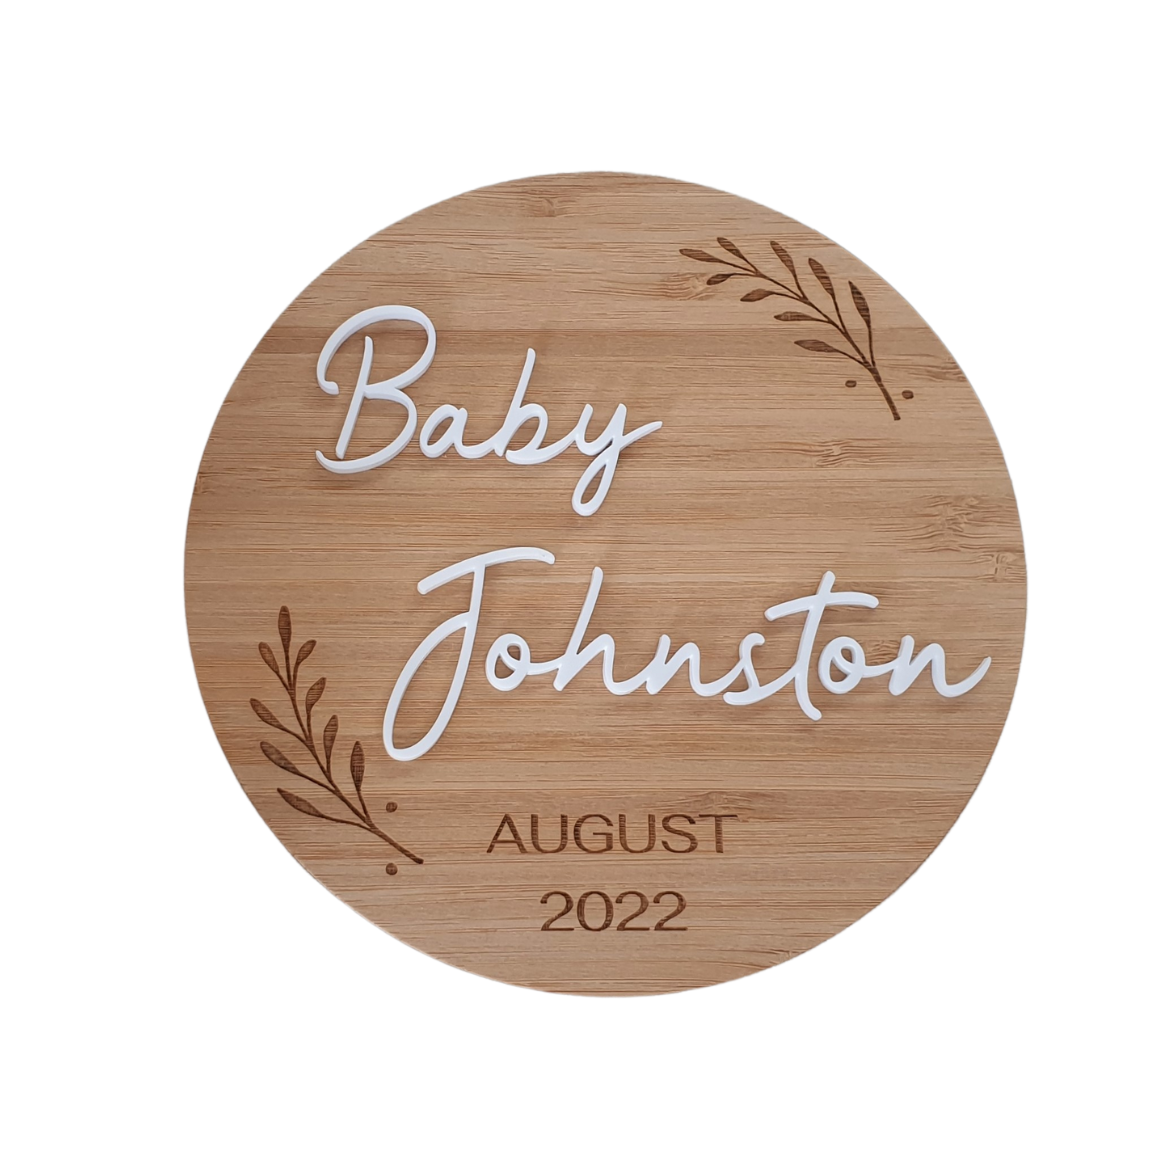 Pregnancy Announcement Wooden Plaque - Bamboo Leaf personal preg Miss Ali's   